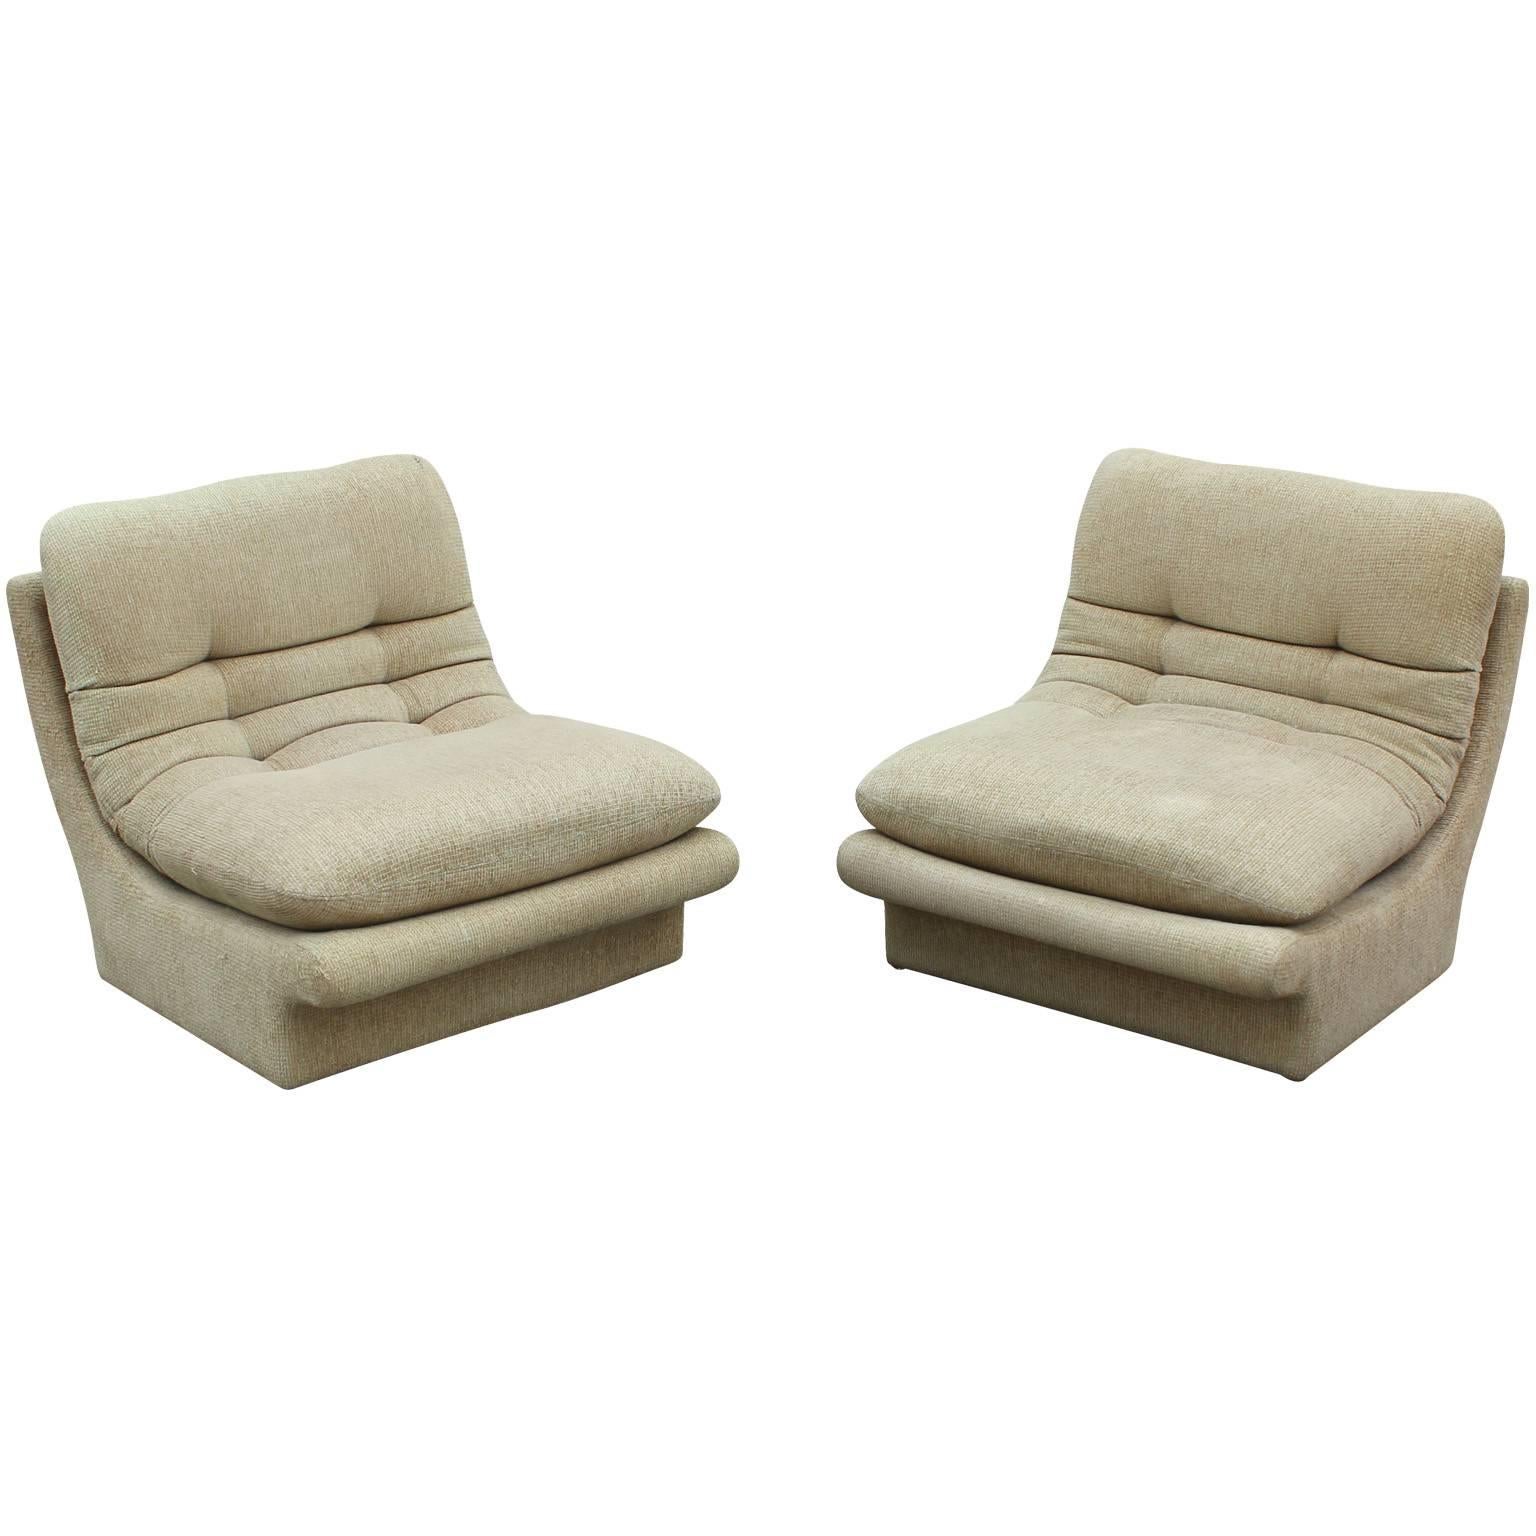 Beautiful pair of Sculptural Vladimir Kagan for Preview slipper lounge chairs with matching ottoman. Scooped chairs are extremely comfortable. Cushions have beep box tufts. Chairs can be pushed together to form a love seat. The fabric is vintage and